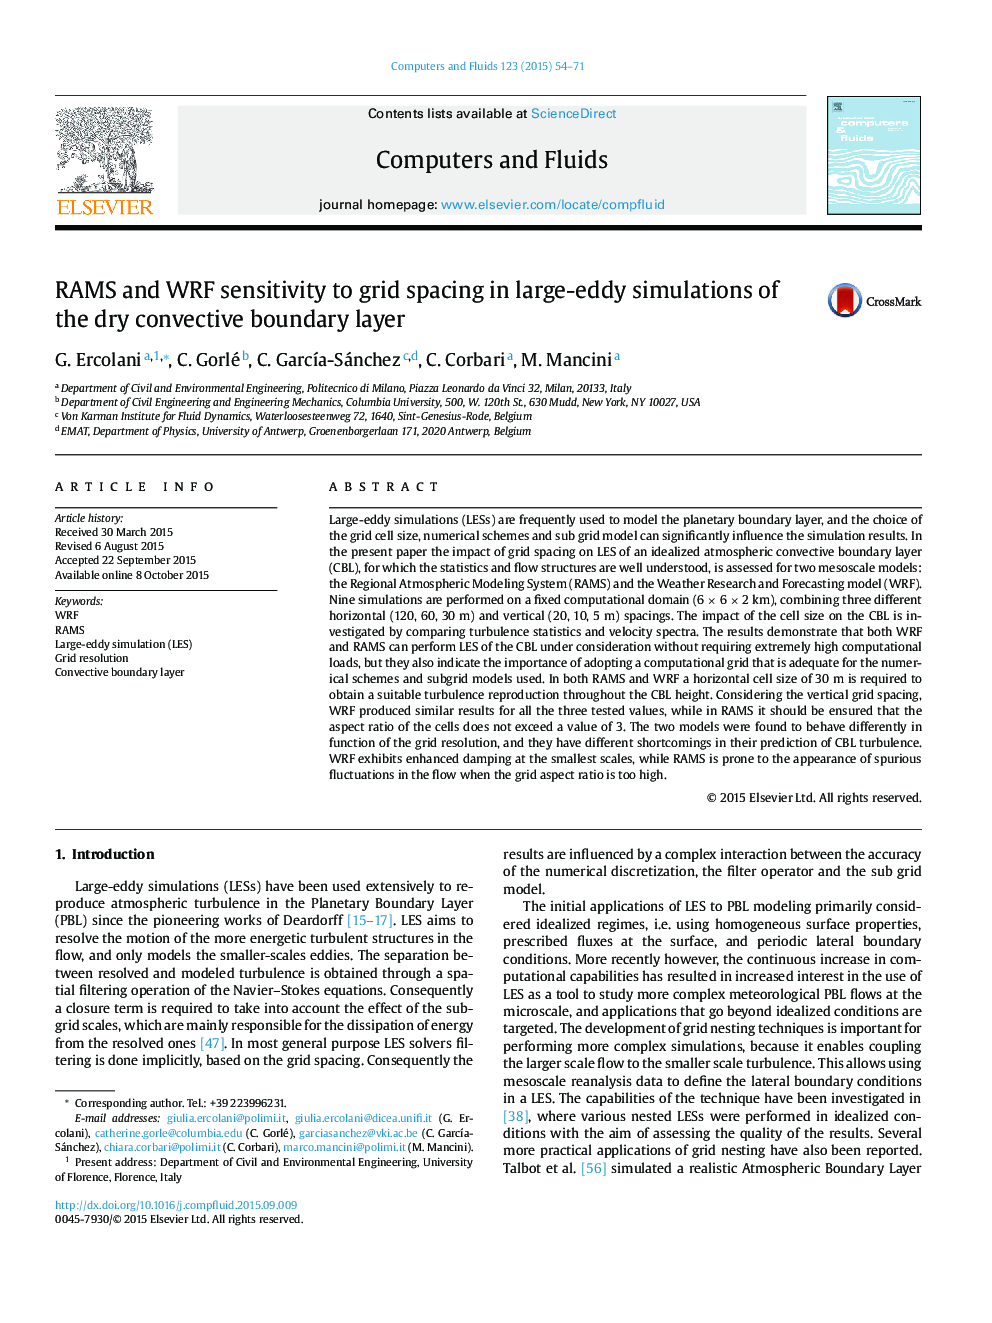 RAMS and WRF sensitivity to grid spacing in large-eddy simulations of the dry convective boundary layer